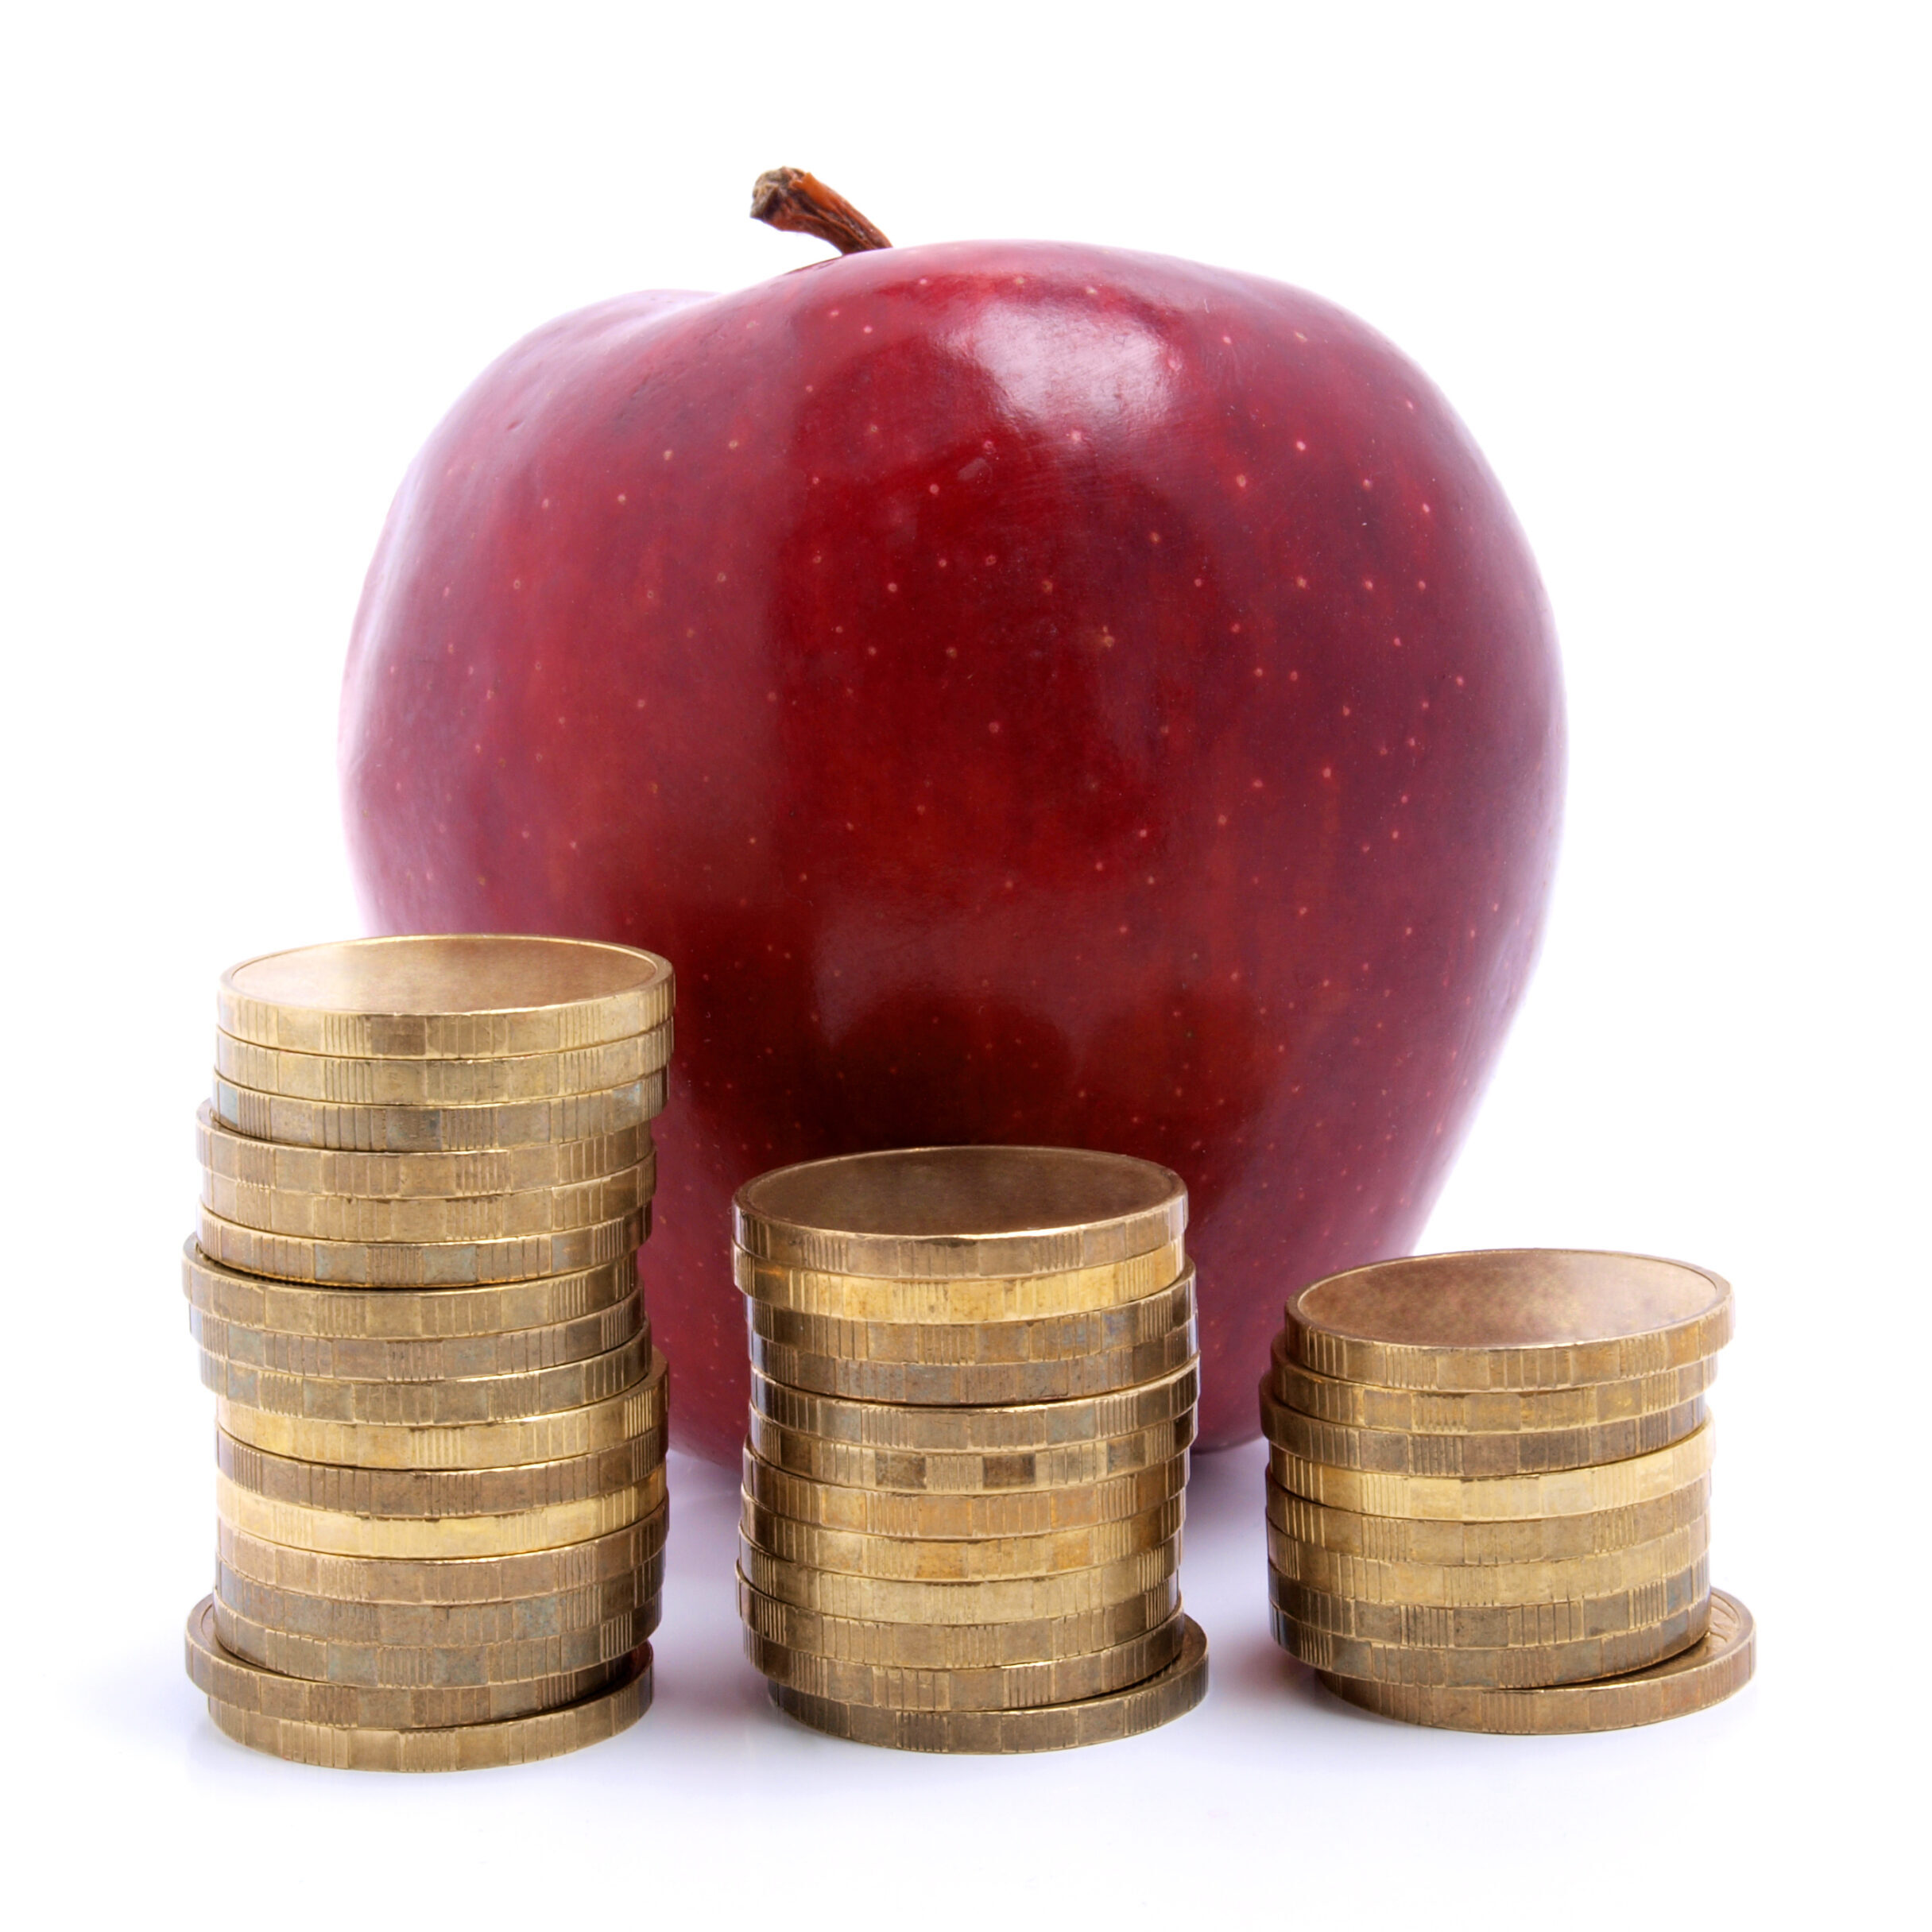 Color photo of an apple and a stack of coins